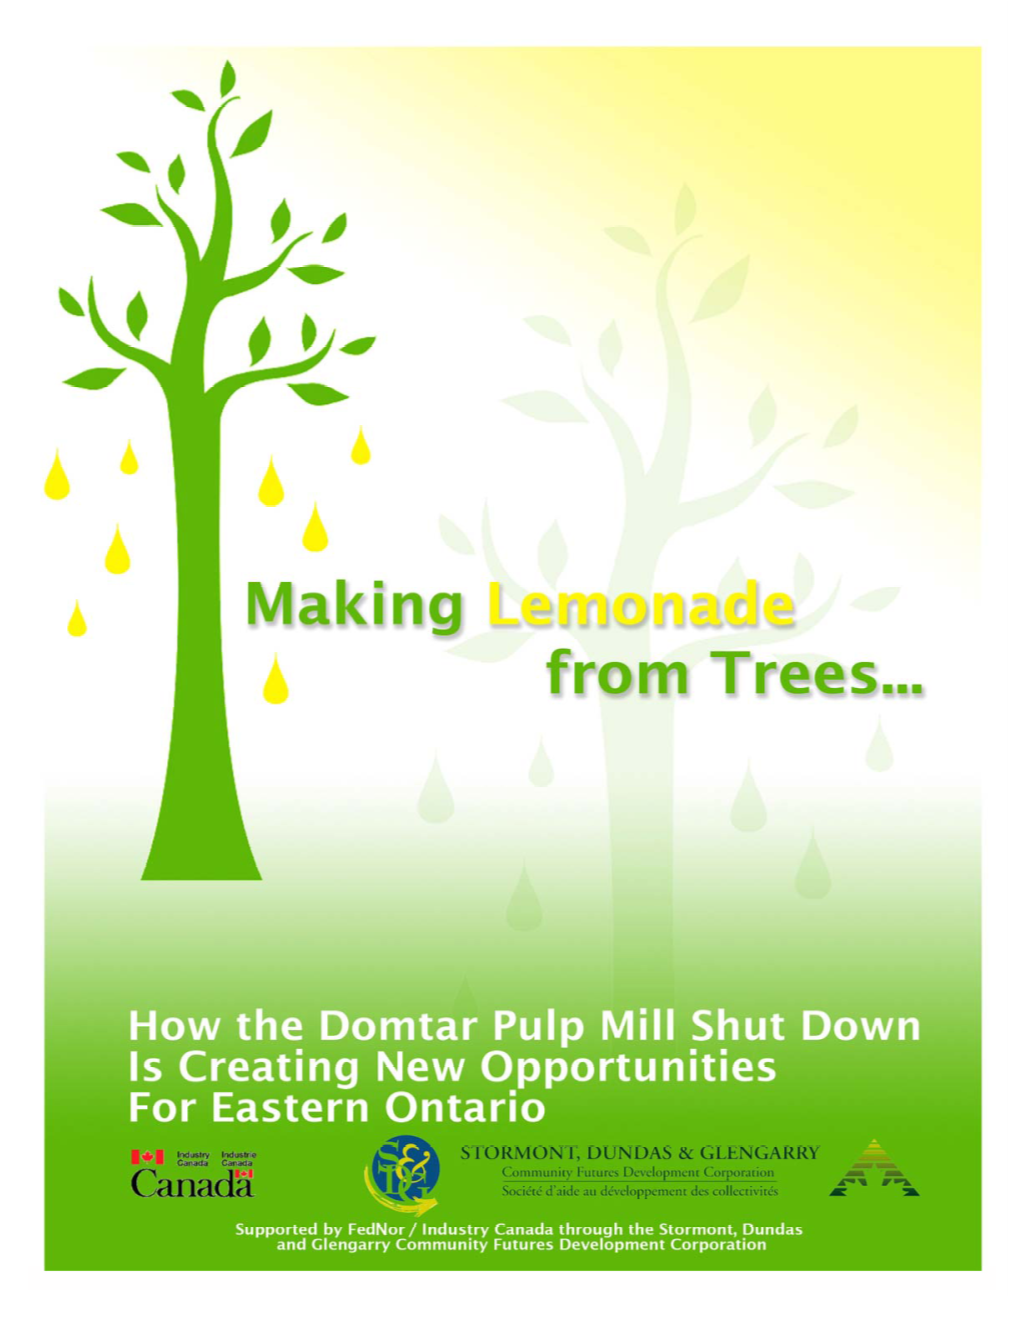 Making Lemonade from Trees: How The